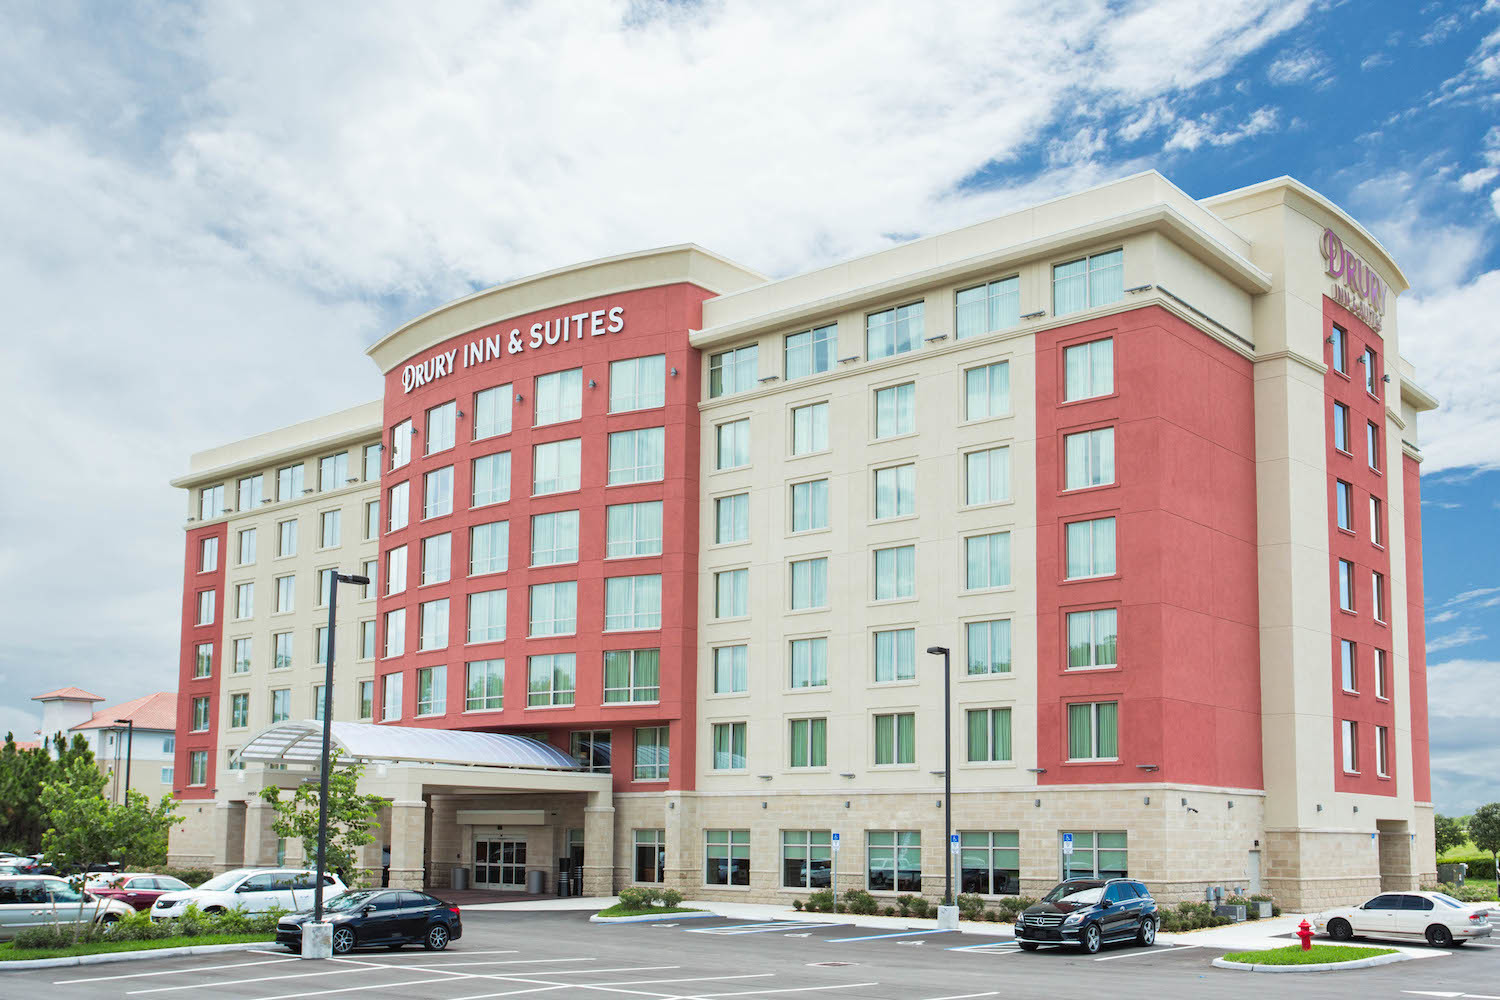 Photo of Drury Inn & Suites Fort Myers Airport FGCU, Fort Myers, FL